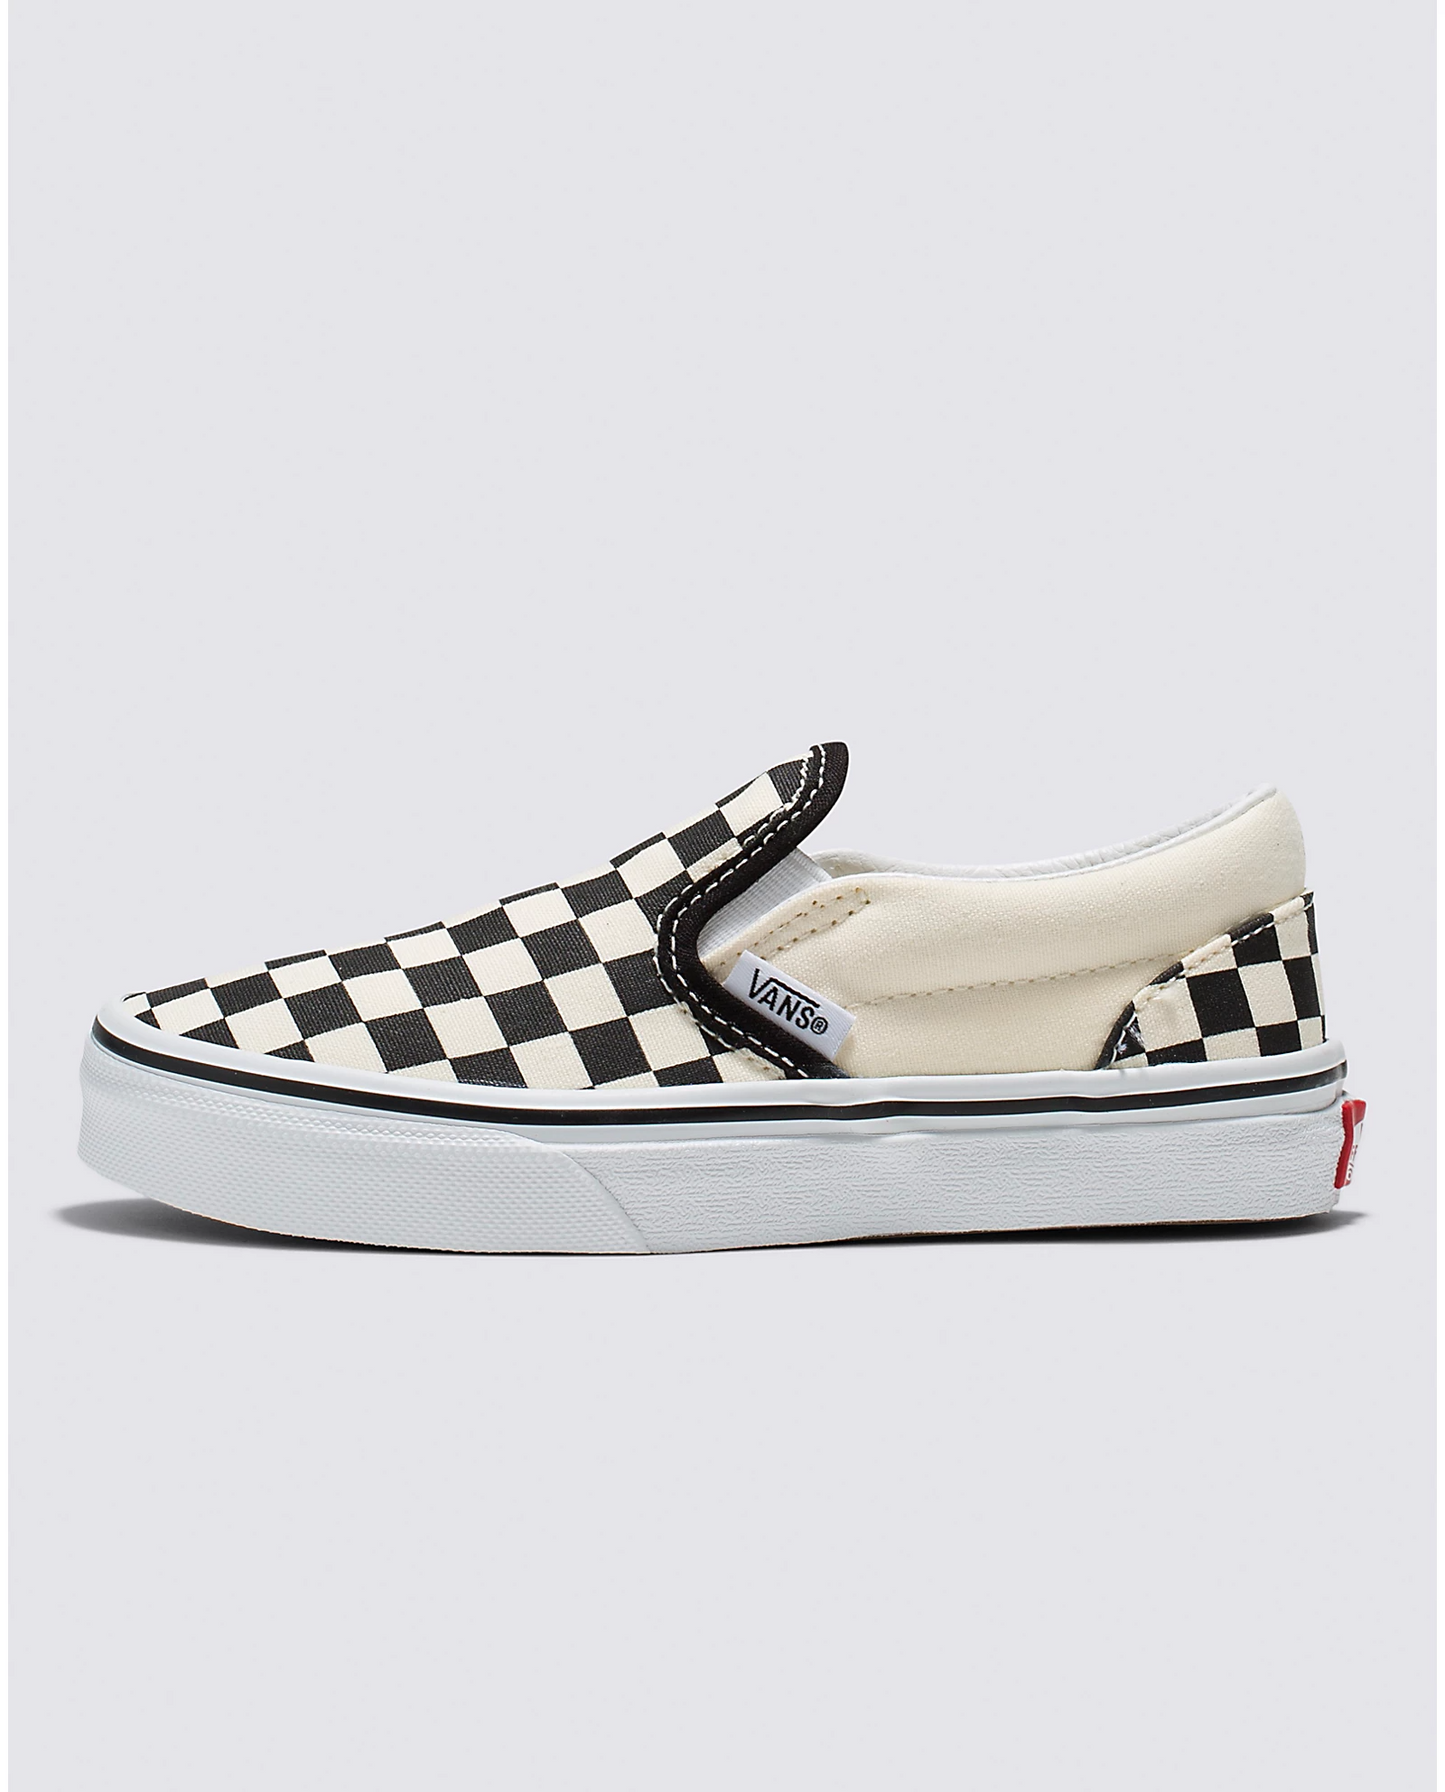 Kids Classic Checkerboard Slip-On Shoes